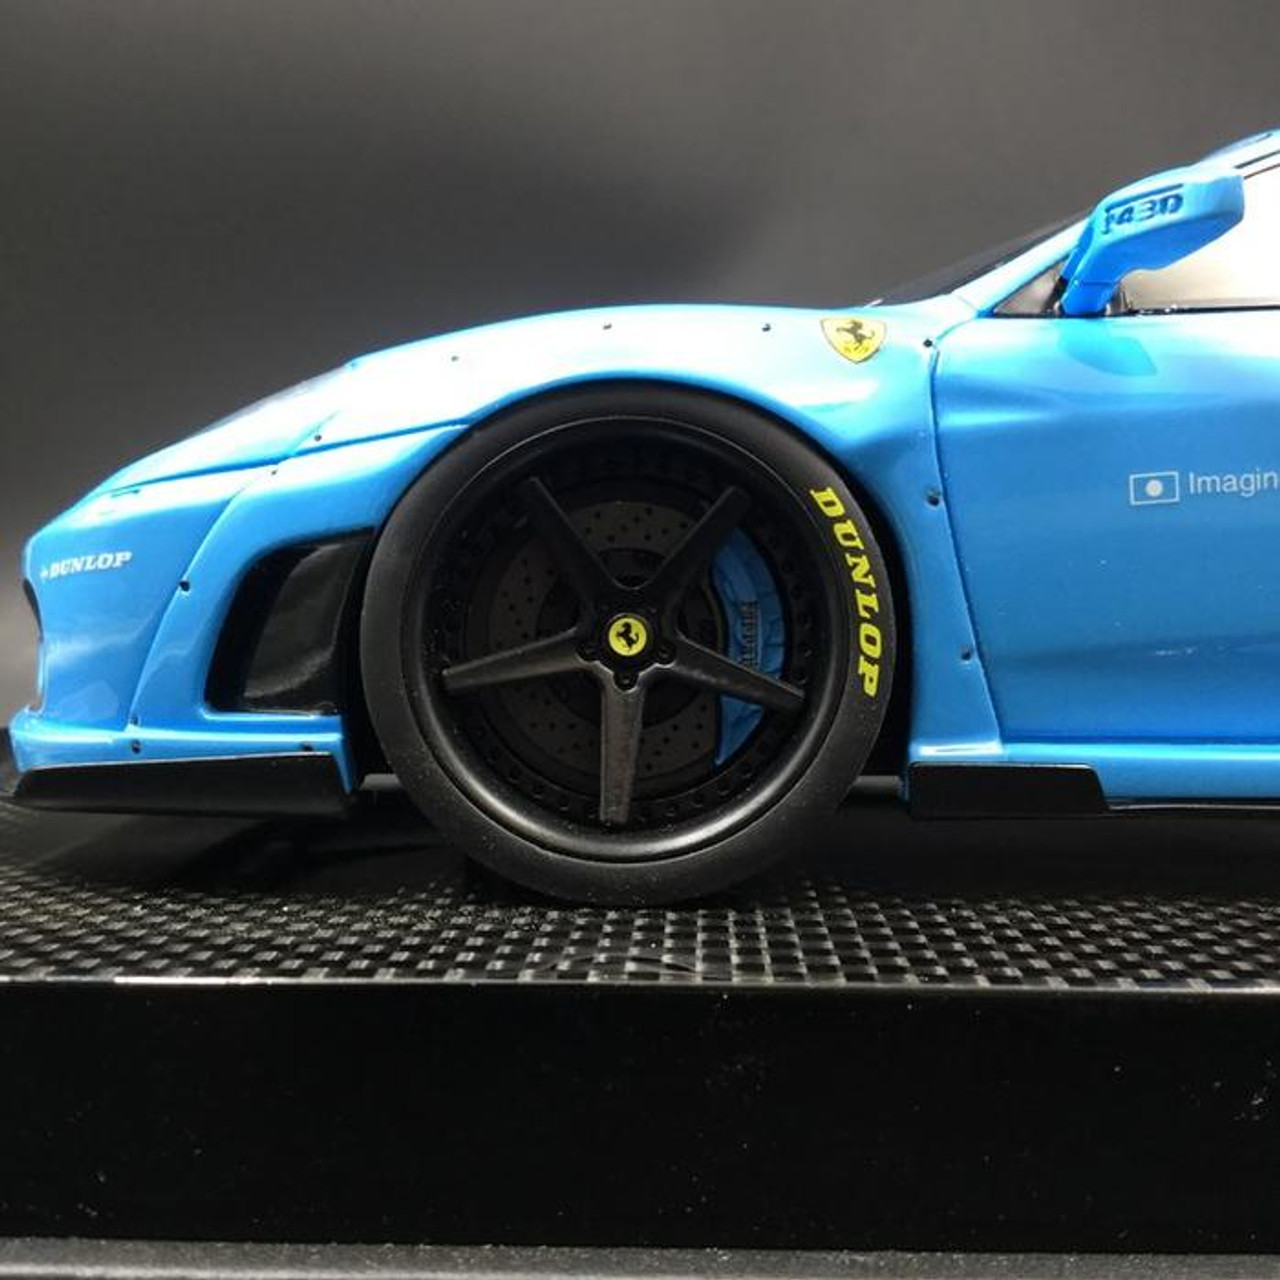 1/18 JUC Ferrari F430 LB Works (Baby Blue) Resin Car Model with Kato San Figure Limited 12 Pieces